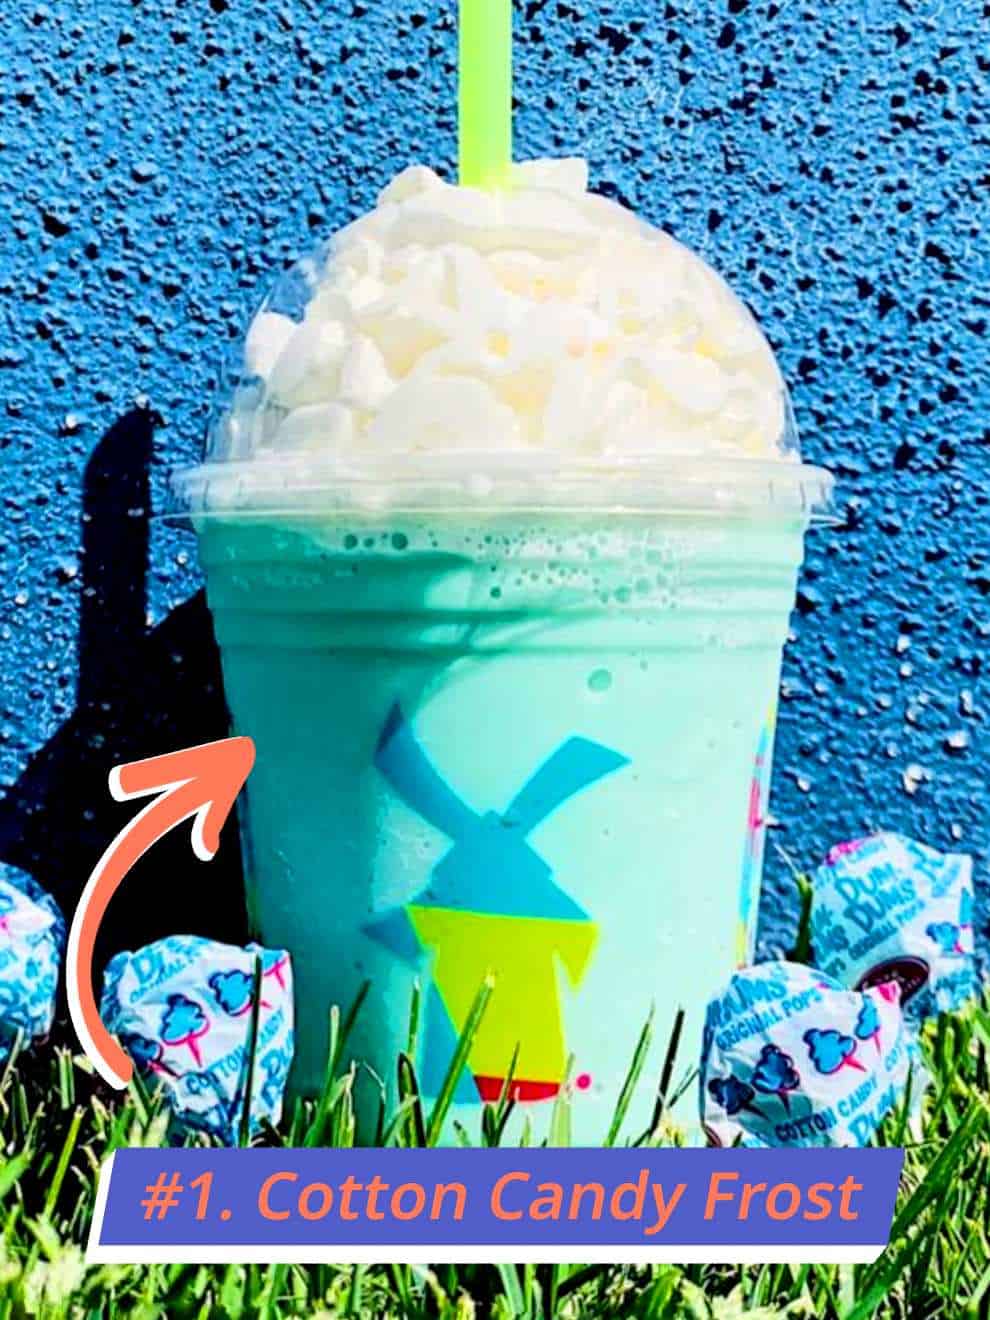 Dutch Bros Cotton Candy Frost